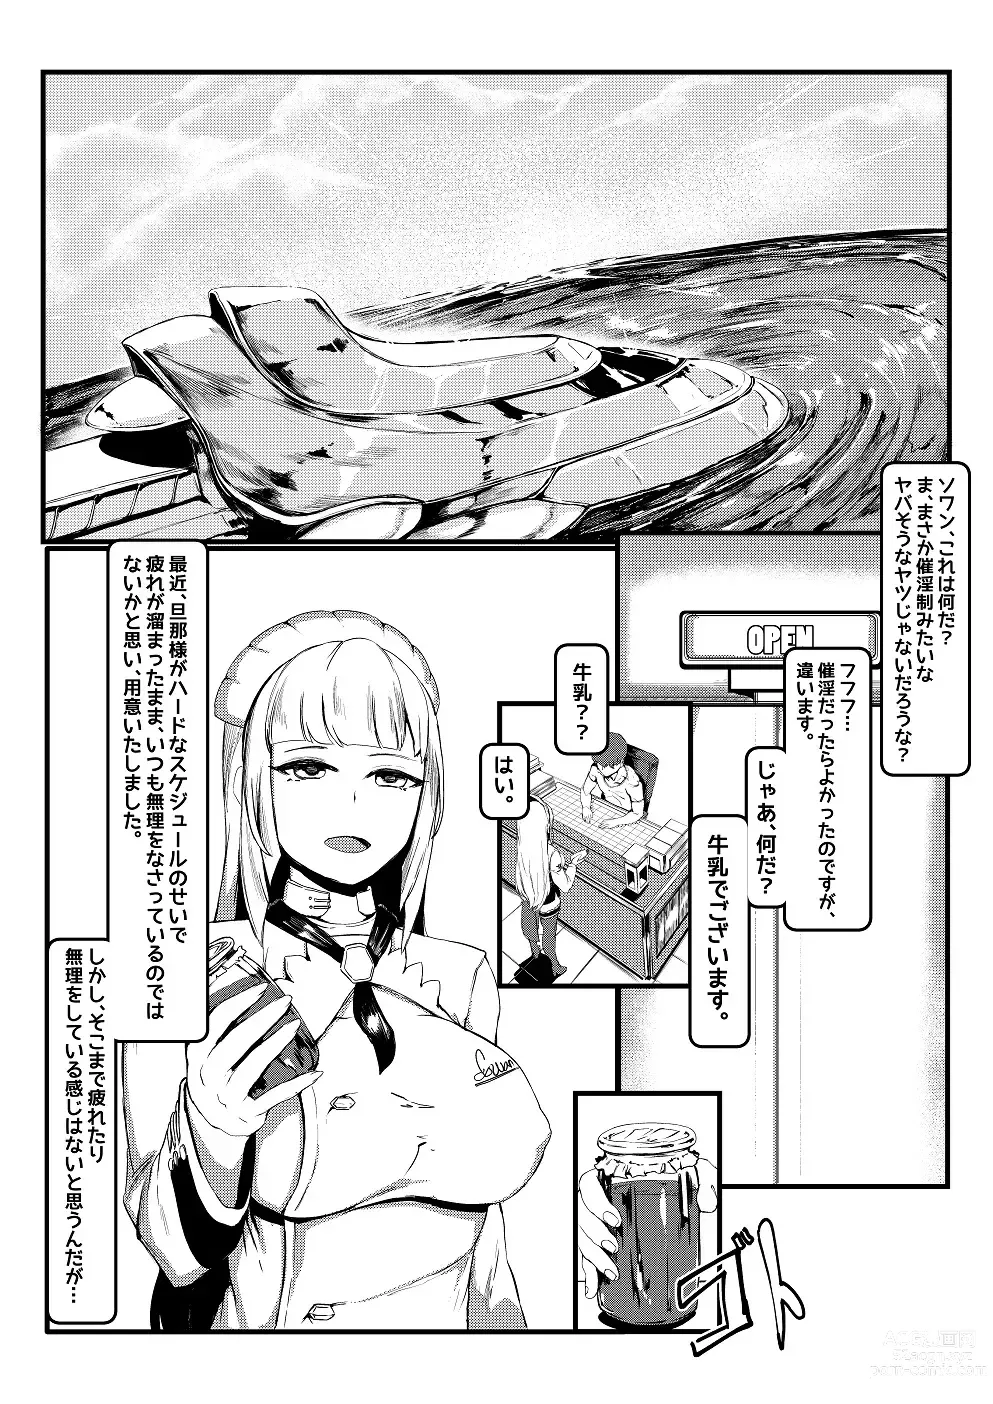 Page 2 of doujinshi Three Milk Flavors